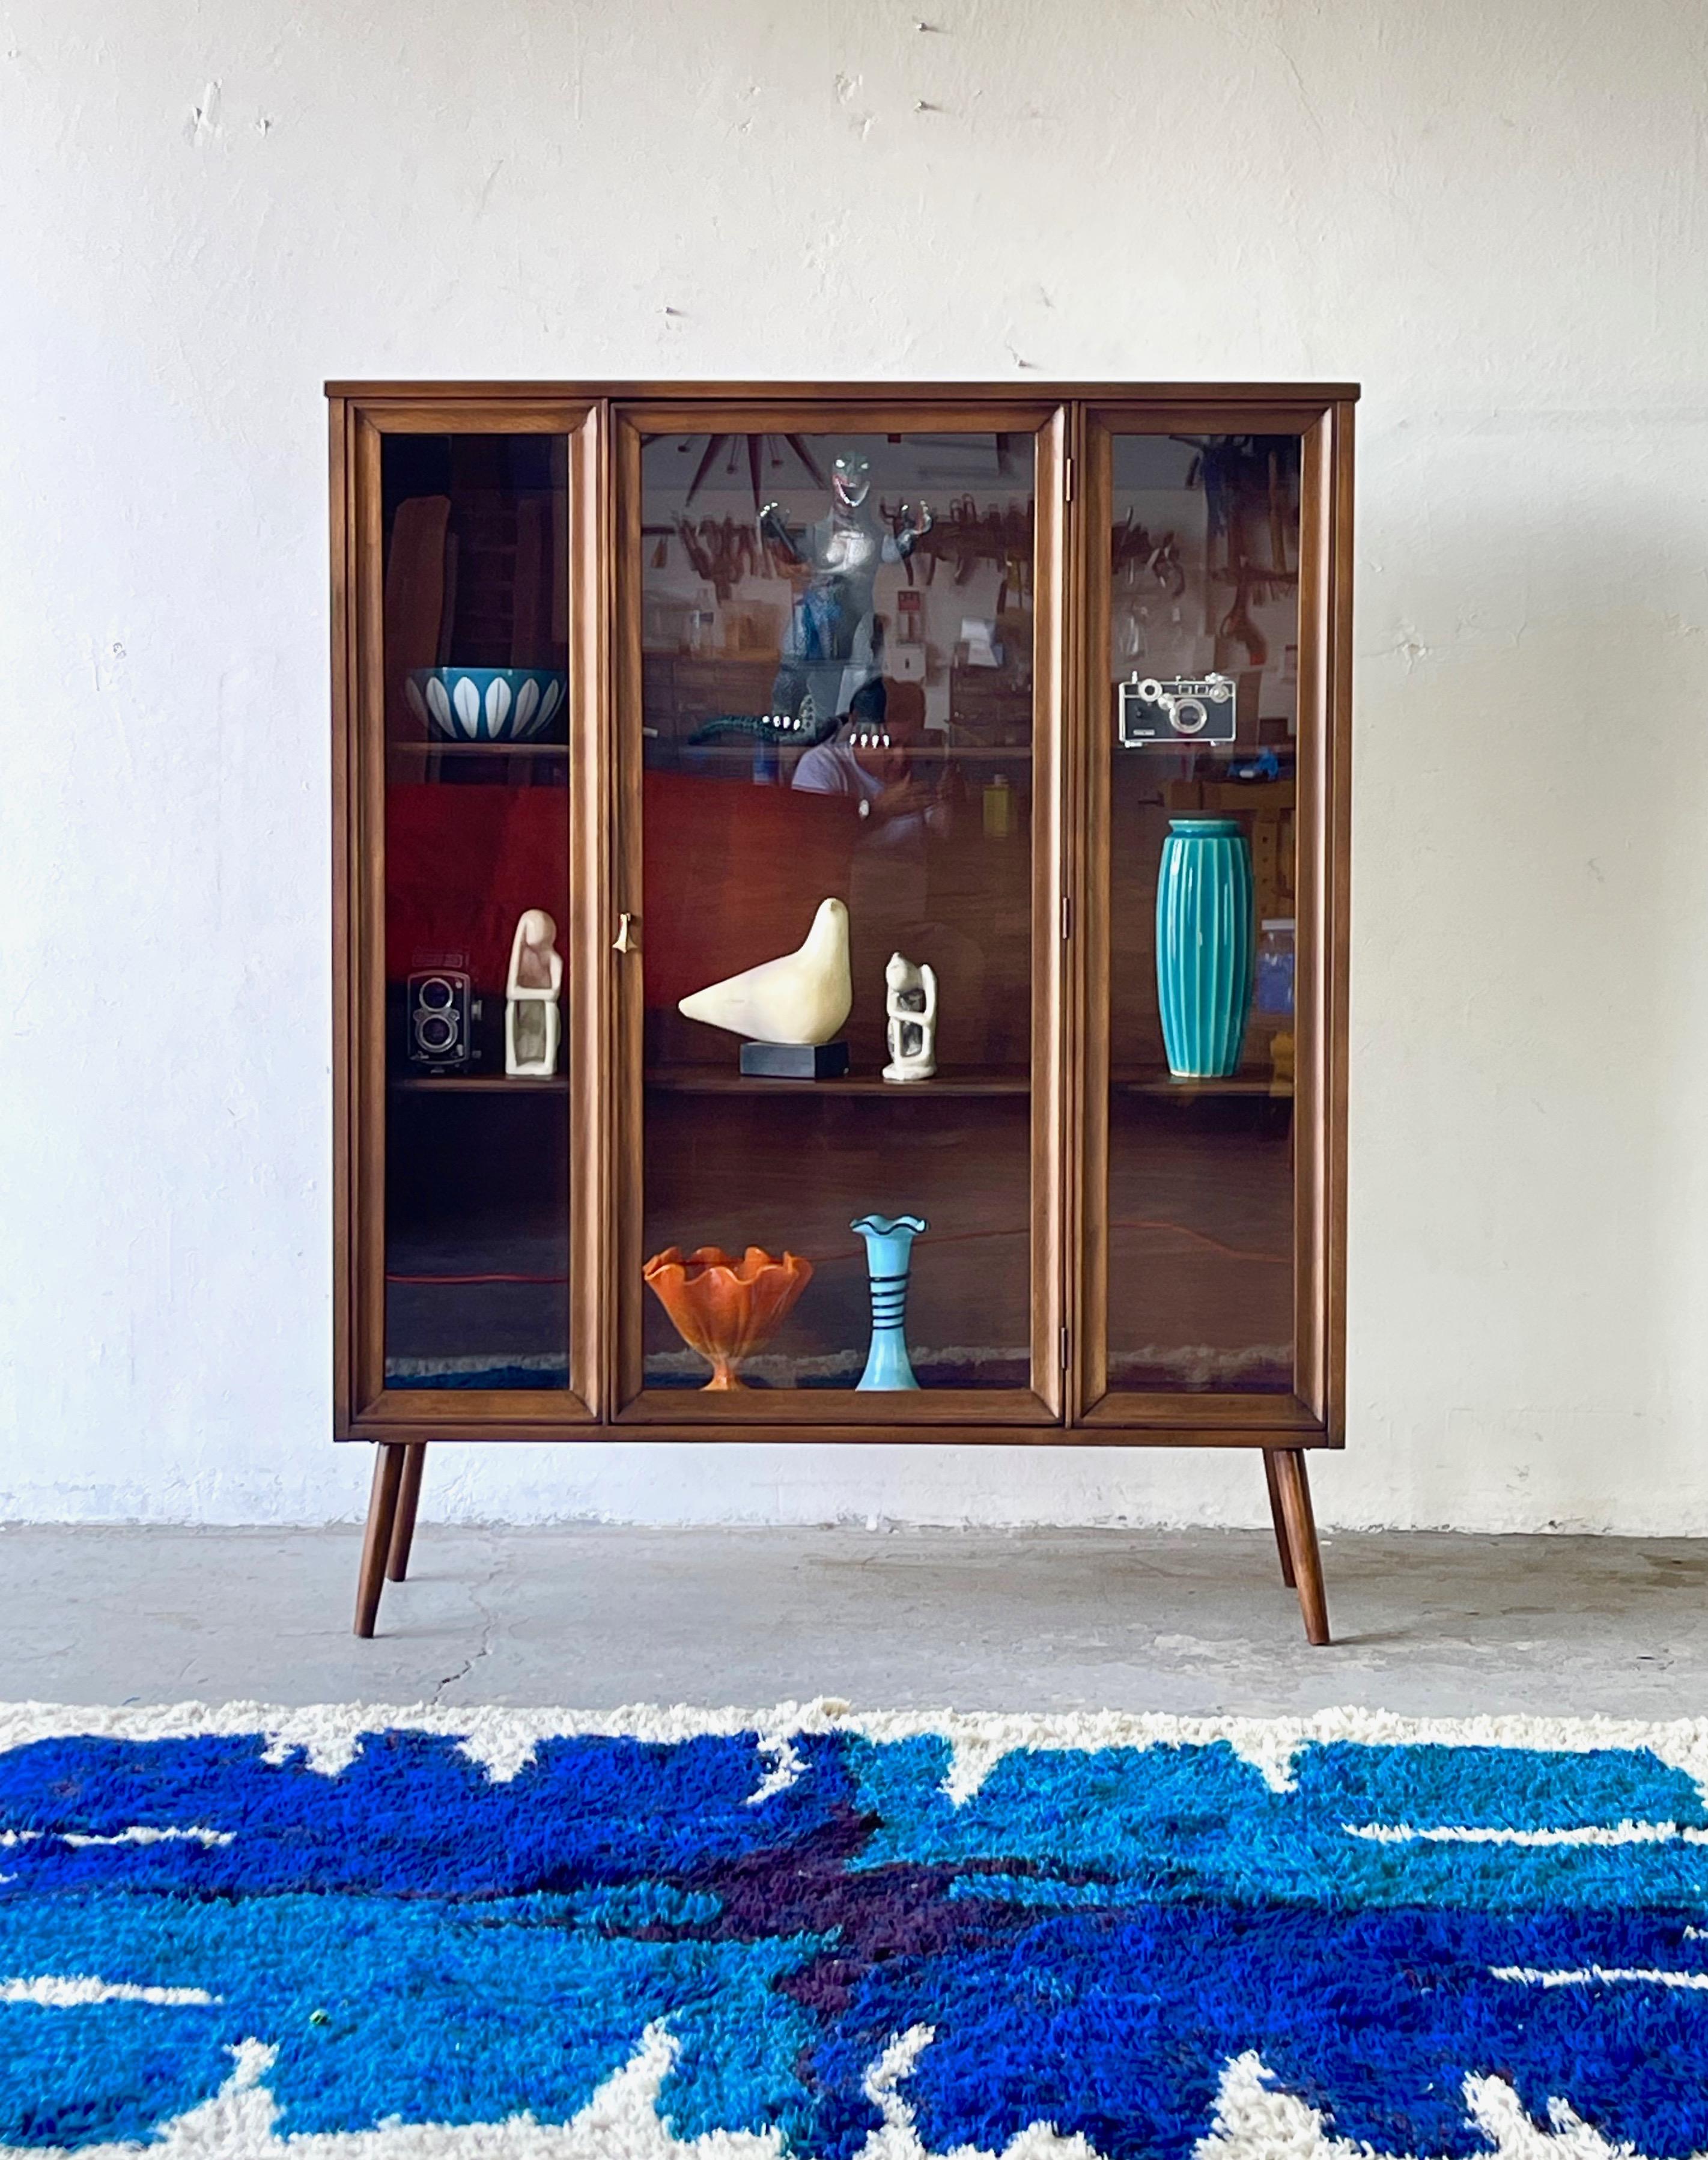 Mid-Century Modern Broyhill Brasilia China display cabinet


Need a place to store books, glassware or something else cool that you like to collect? This mid century modern cabinet with glass doors is a great solution!


This vintage 1960s